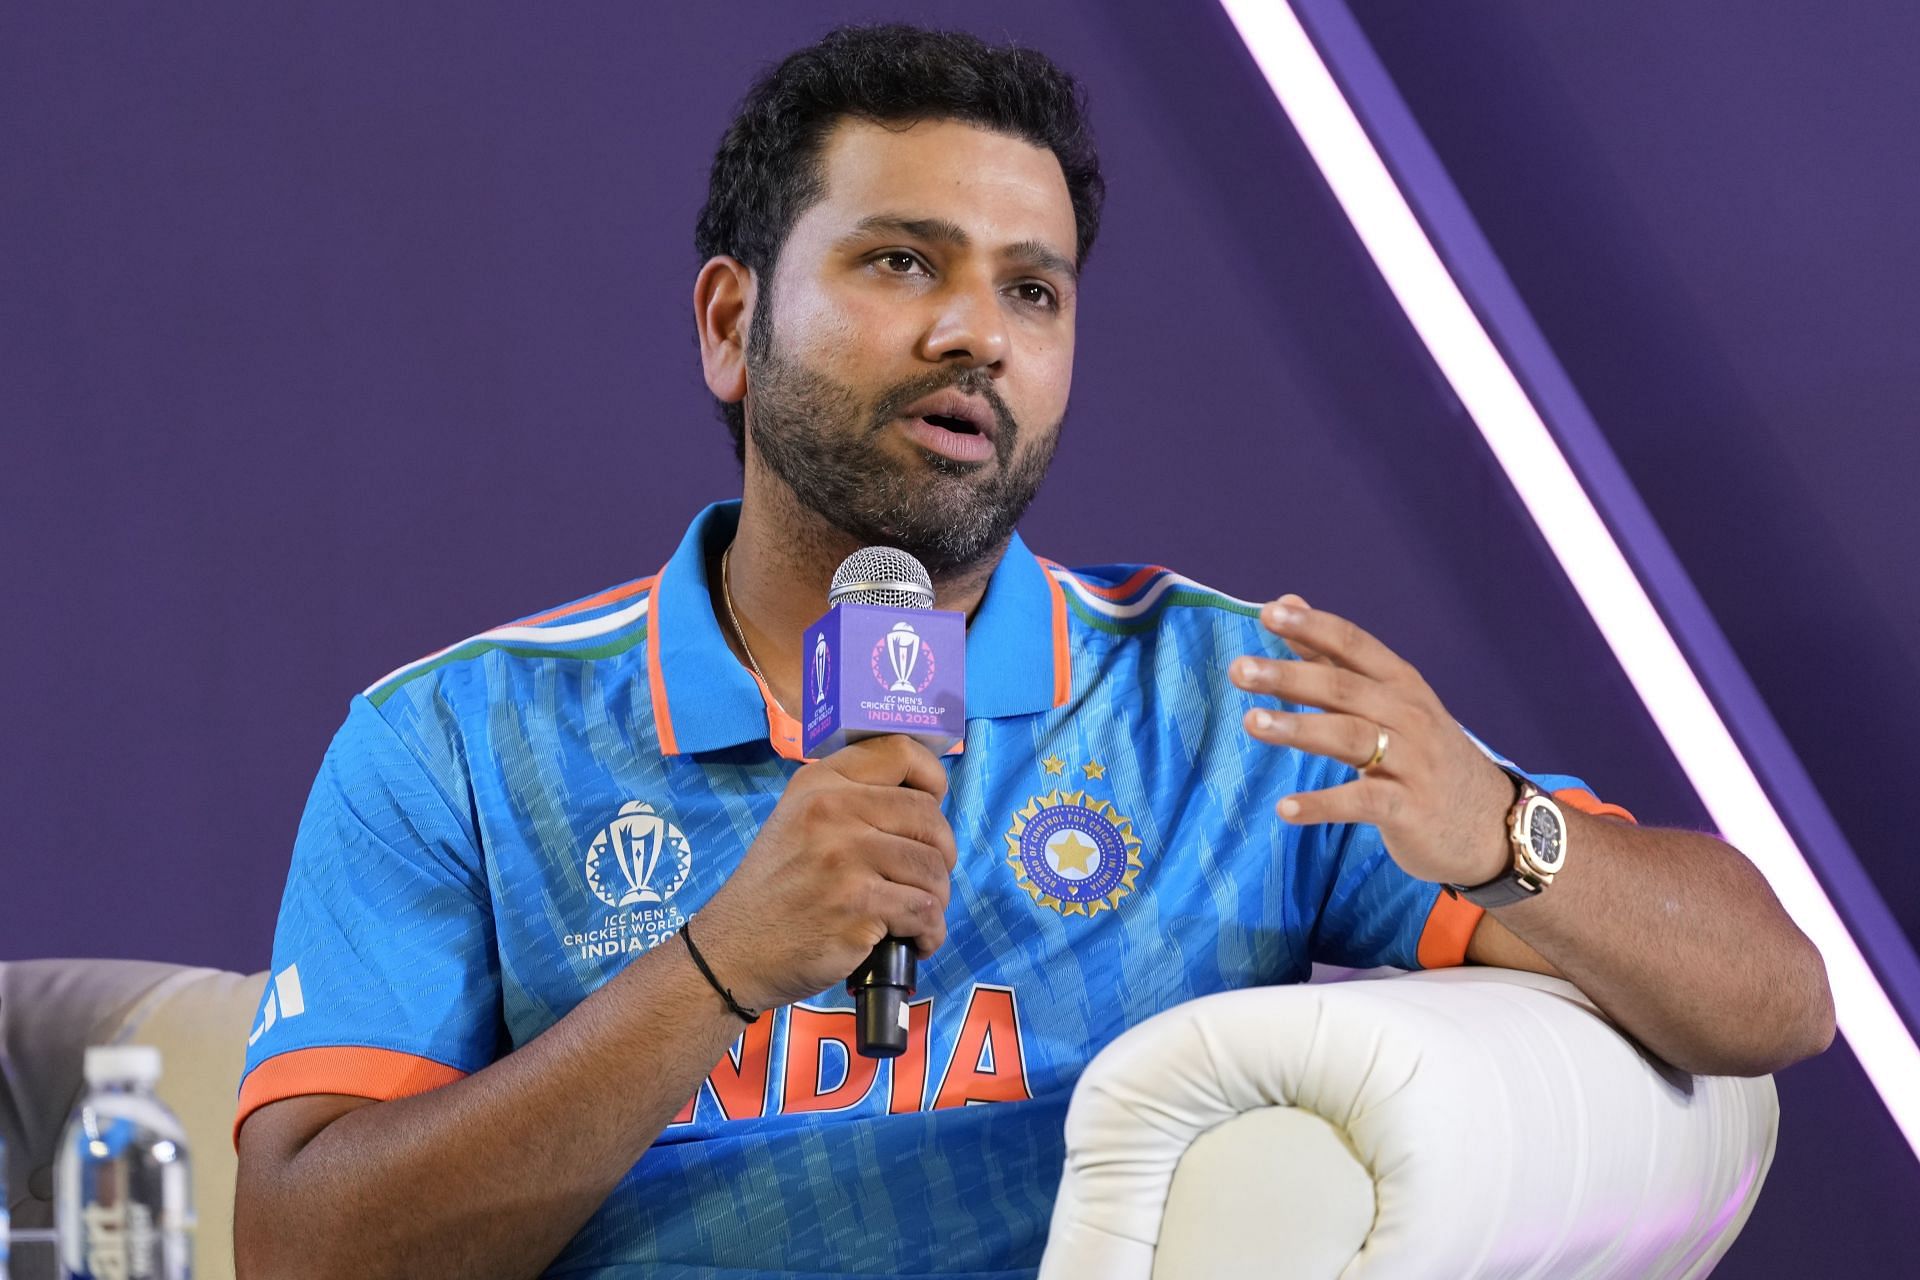 India will be led by Rohit Sharma for the first time in the 50-over World Cup